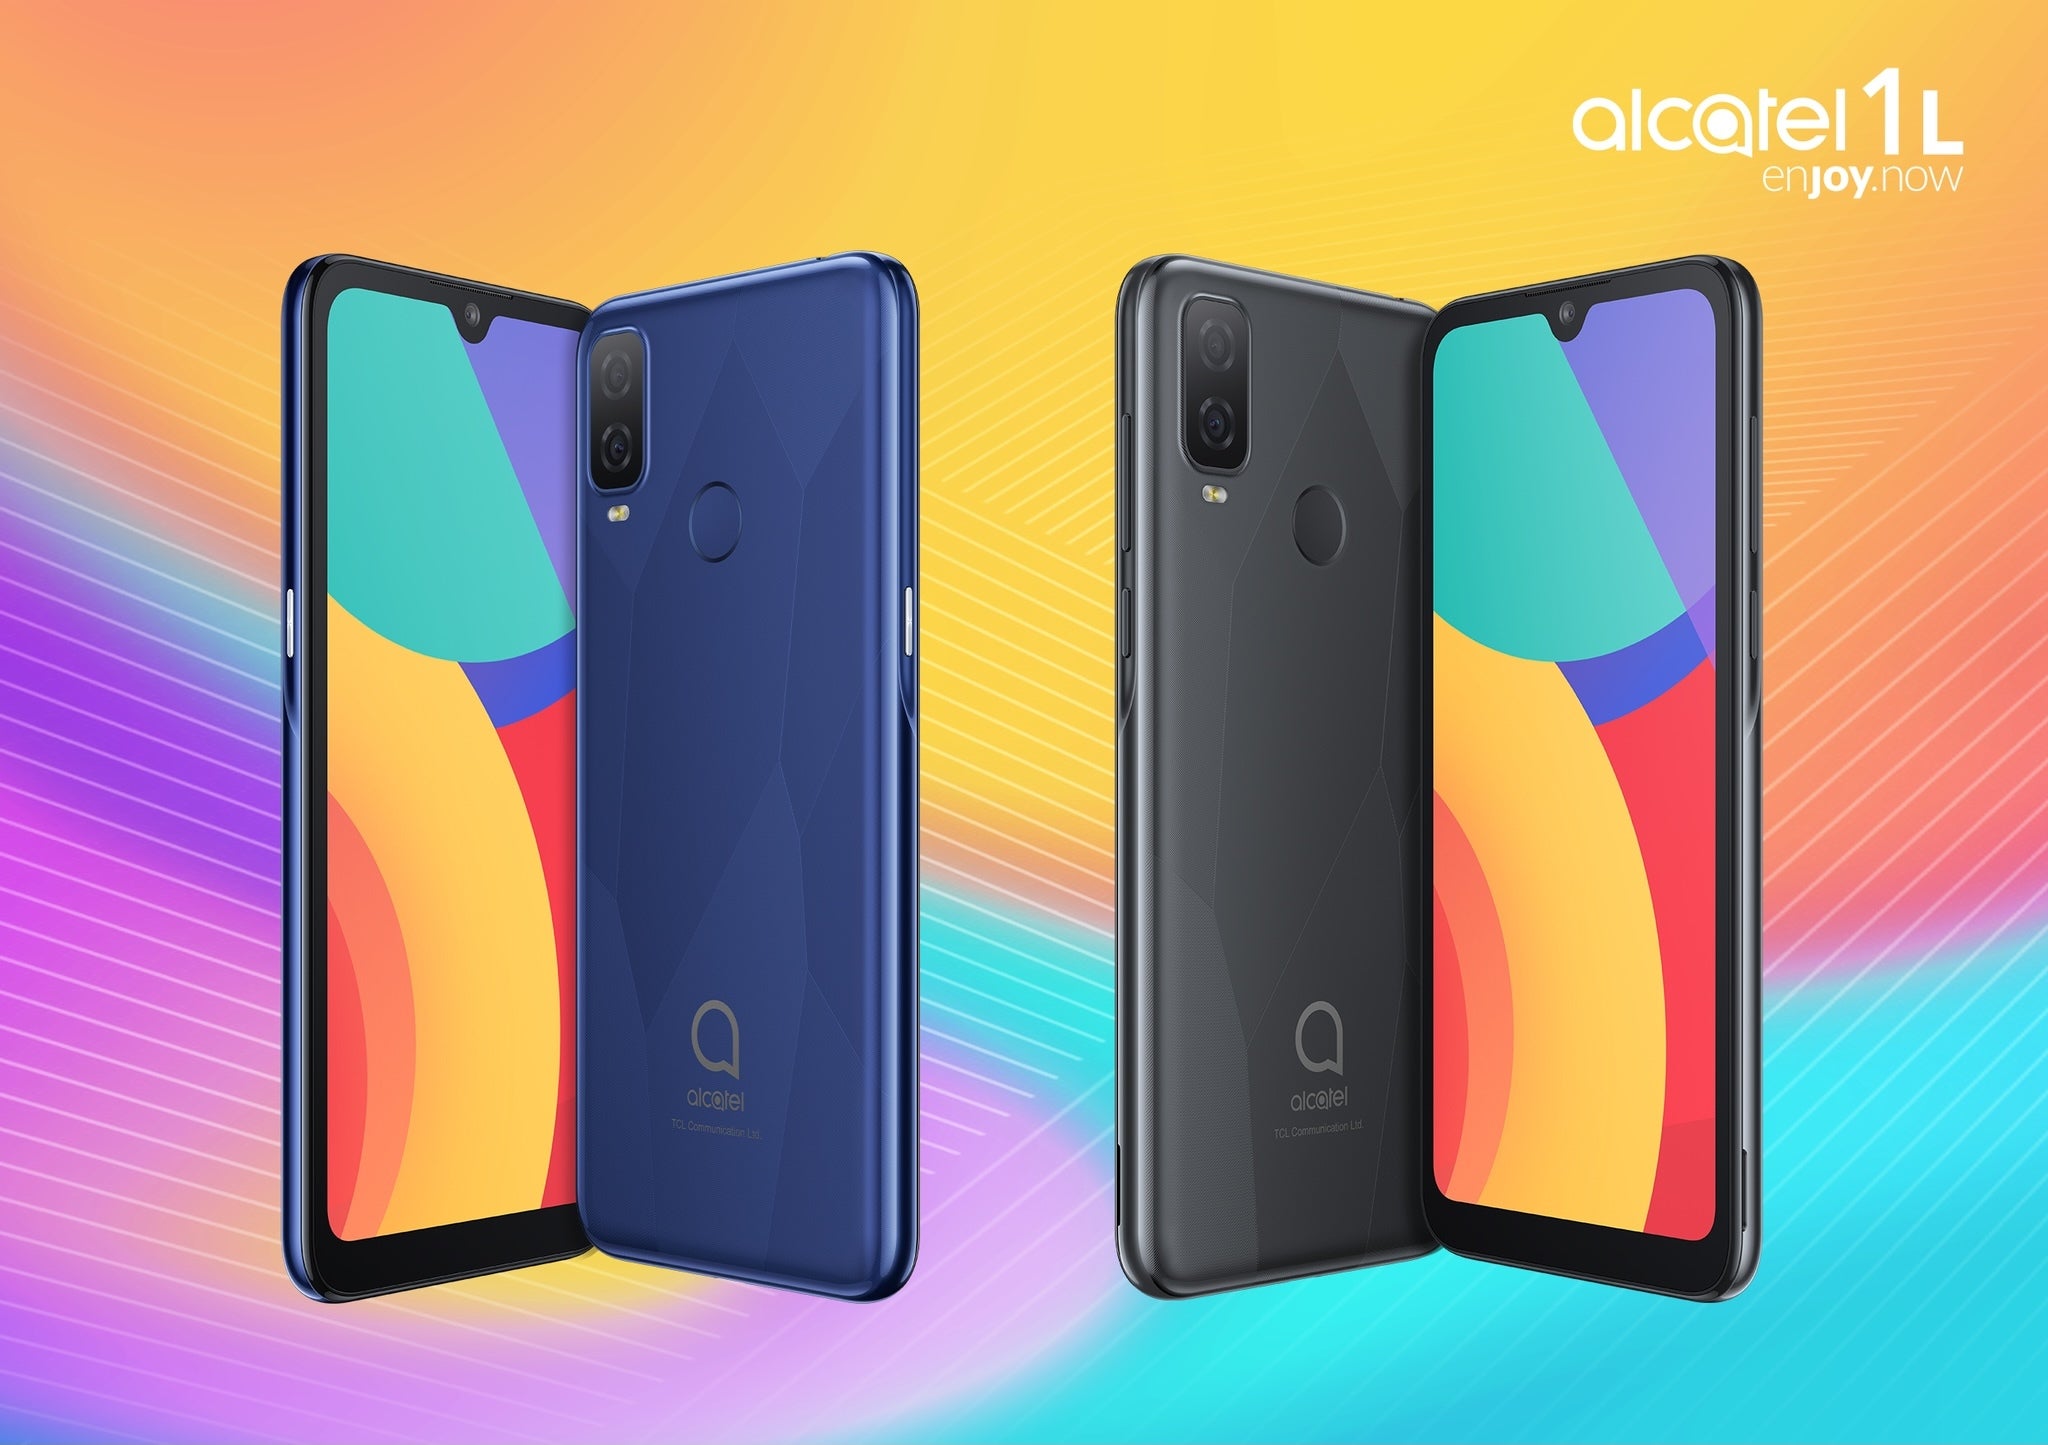 The Alcatel 1L is available in Black and Blue - Alcatel introduces a range of super cheap smartphones